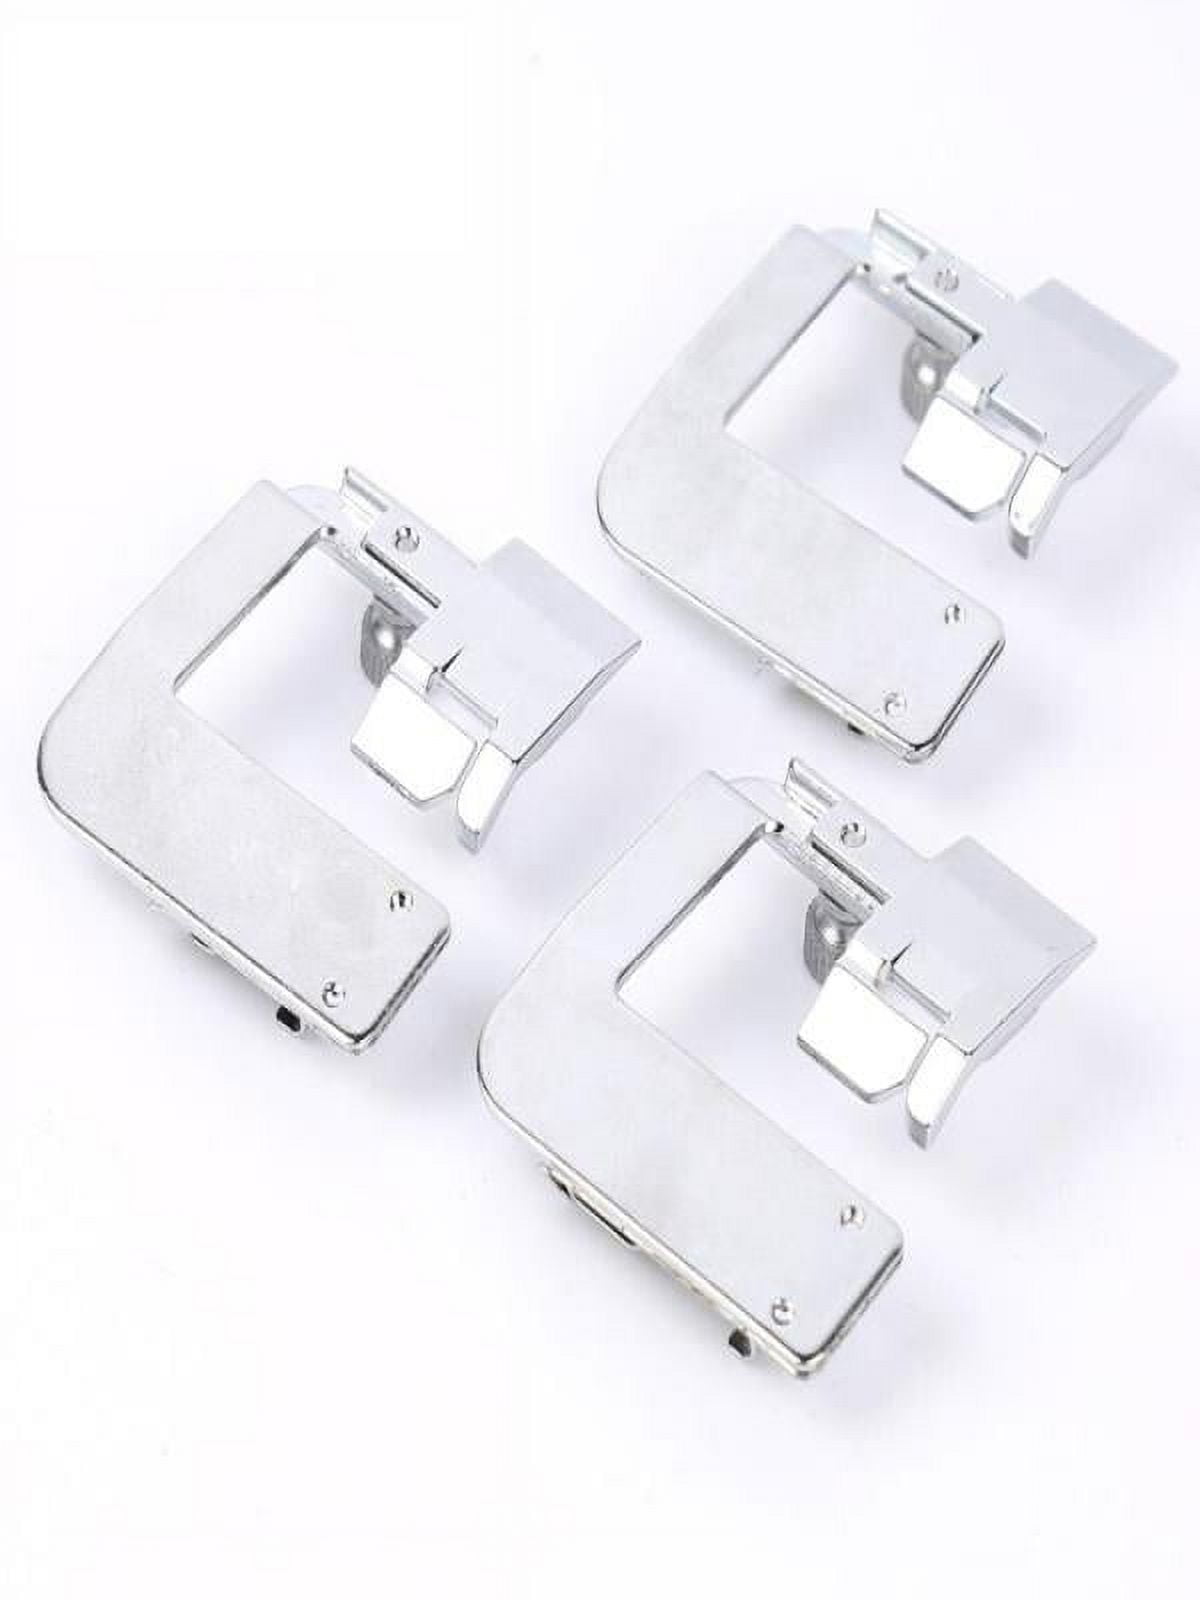 TISEKER 3 Sizes Wide Rolled Hem Pressure Foot Sewing Machine Presser Foot  Hemmer Foot Set 1/2 Inch, 3/4 Inch, 1 Inch for Brother Singer and Other Low